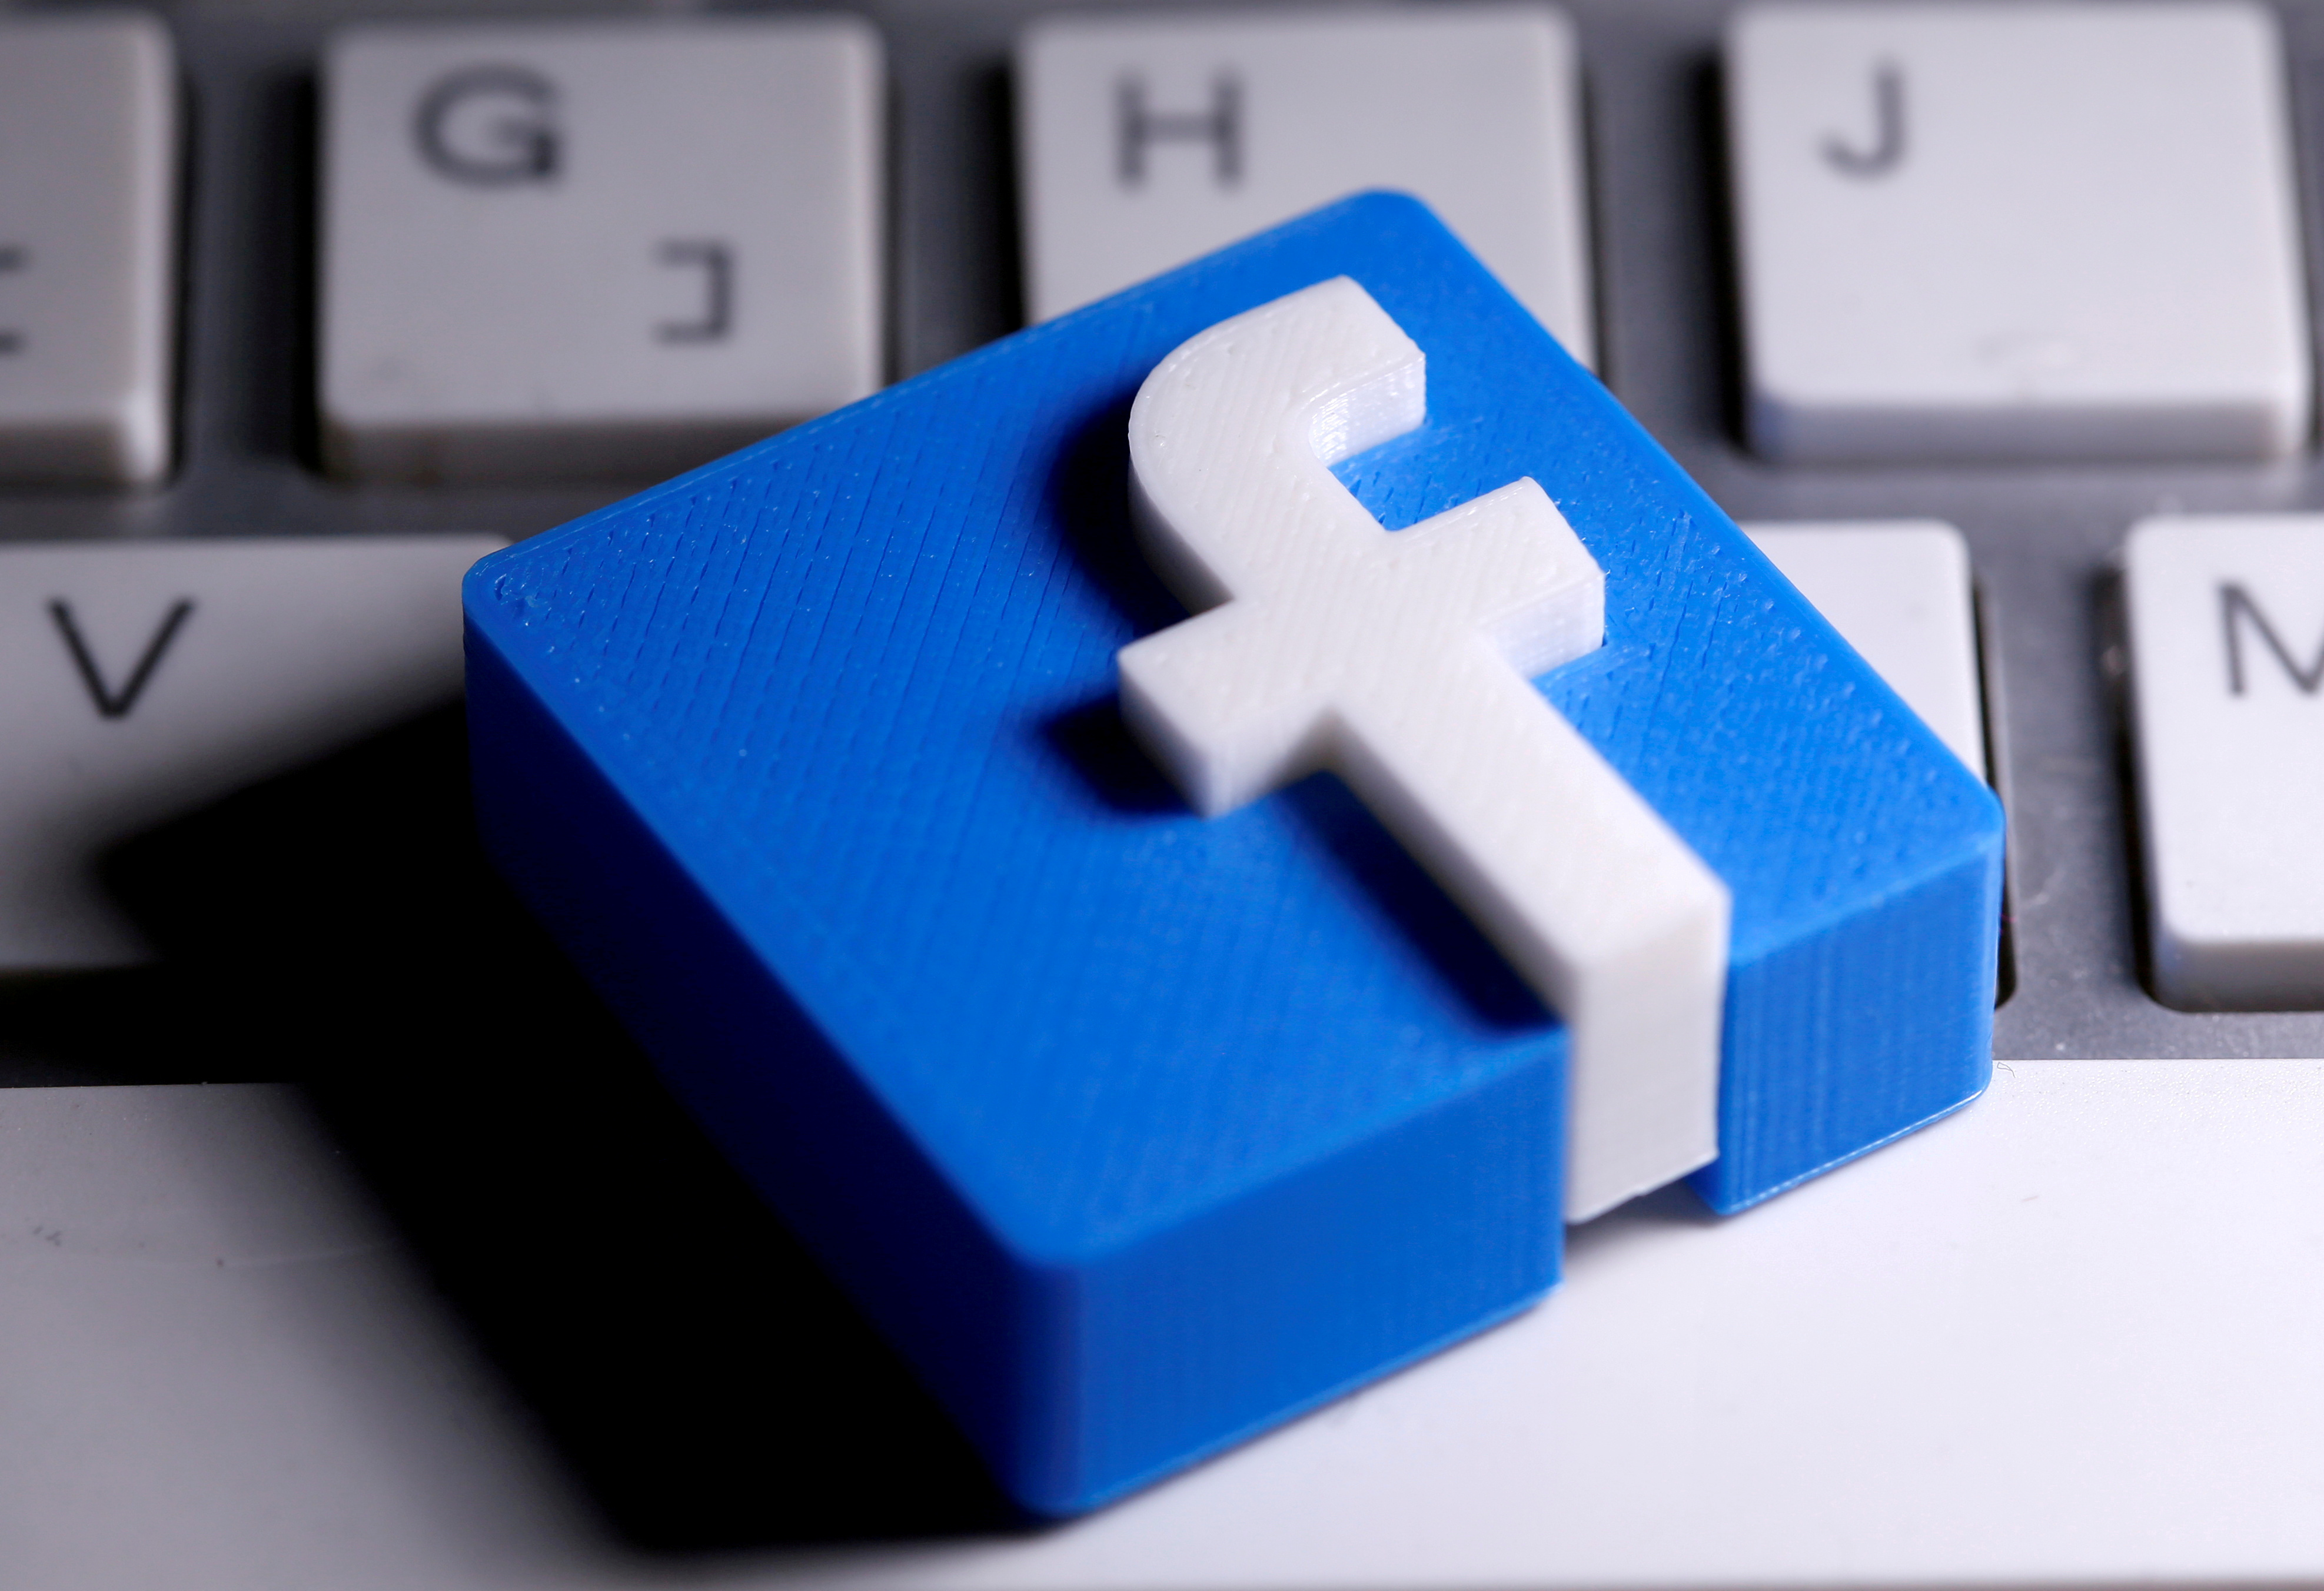 A 3D-printed Facebook logo is seen placed on a keyboard in this illustration taken March 25, 2020. REUTERS/Dado Ruvic/Illustration